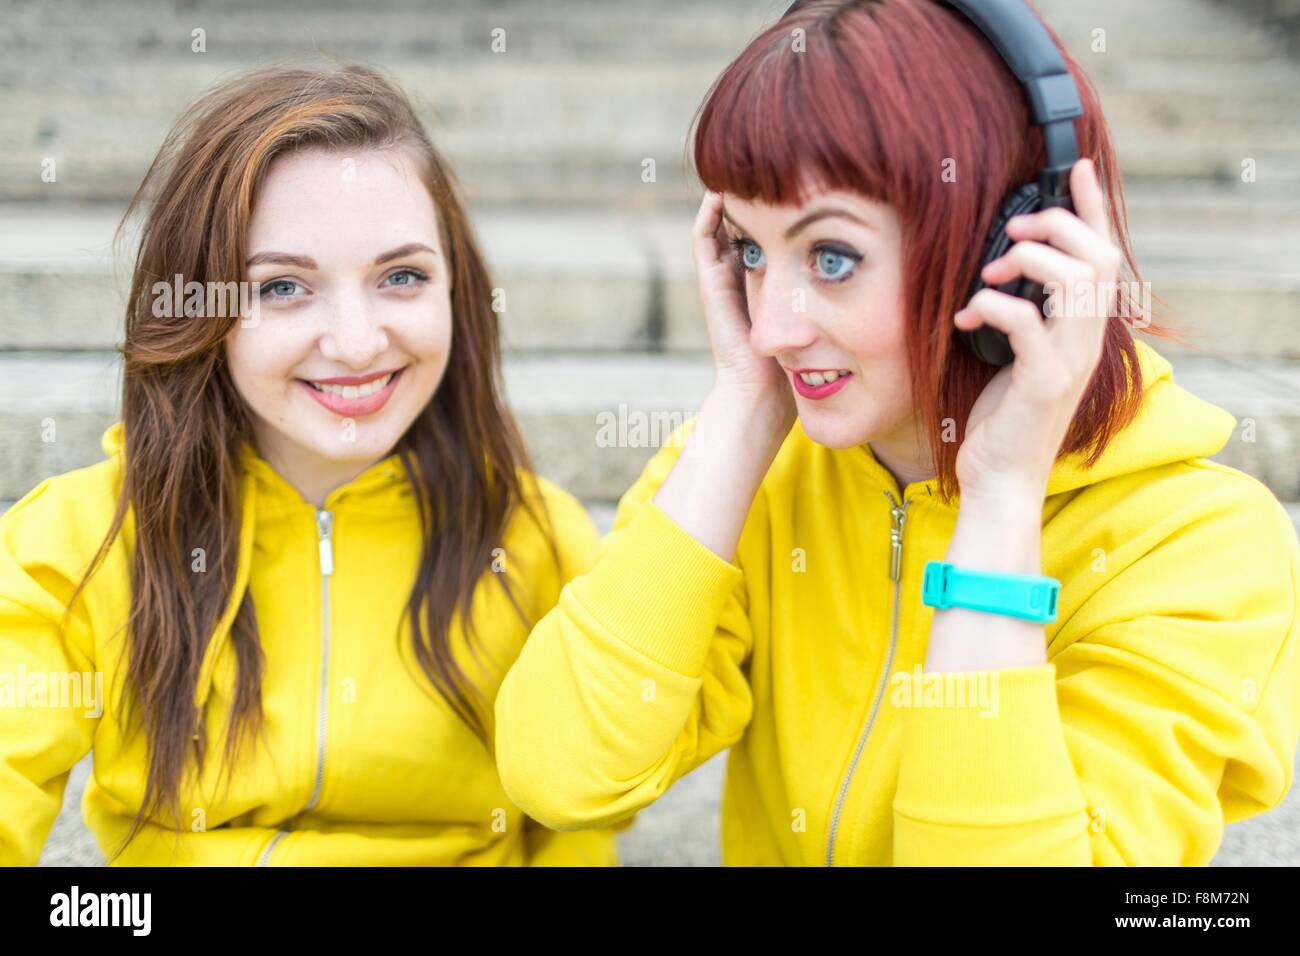 Young women with earphones on steps Stock Photo